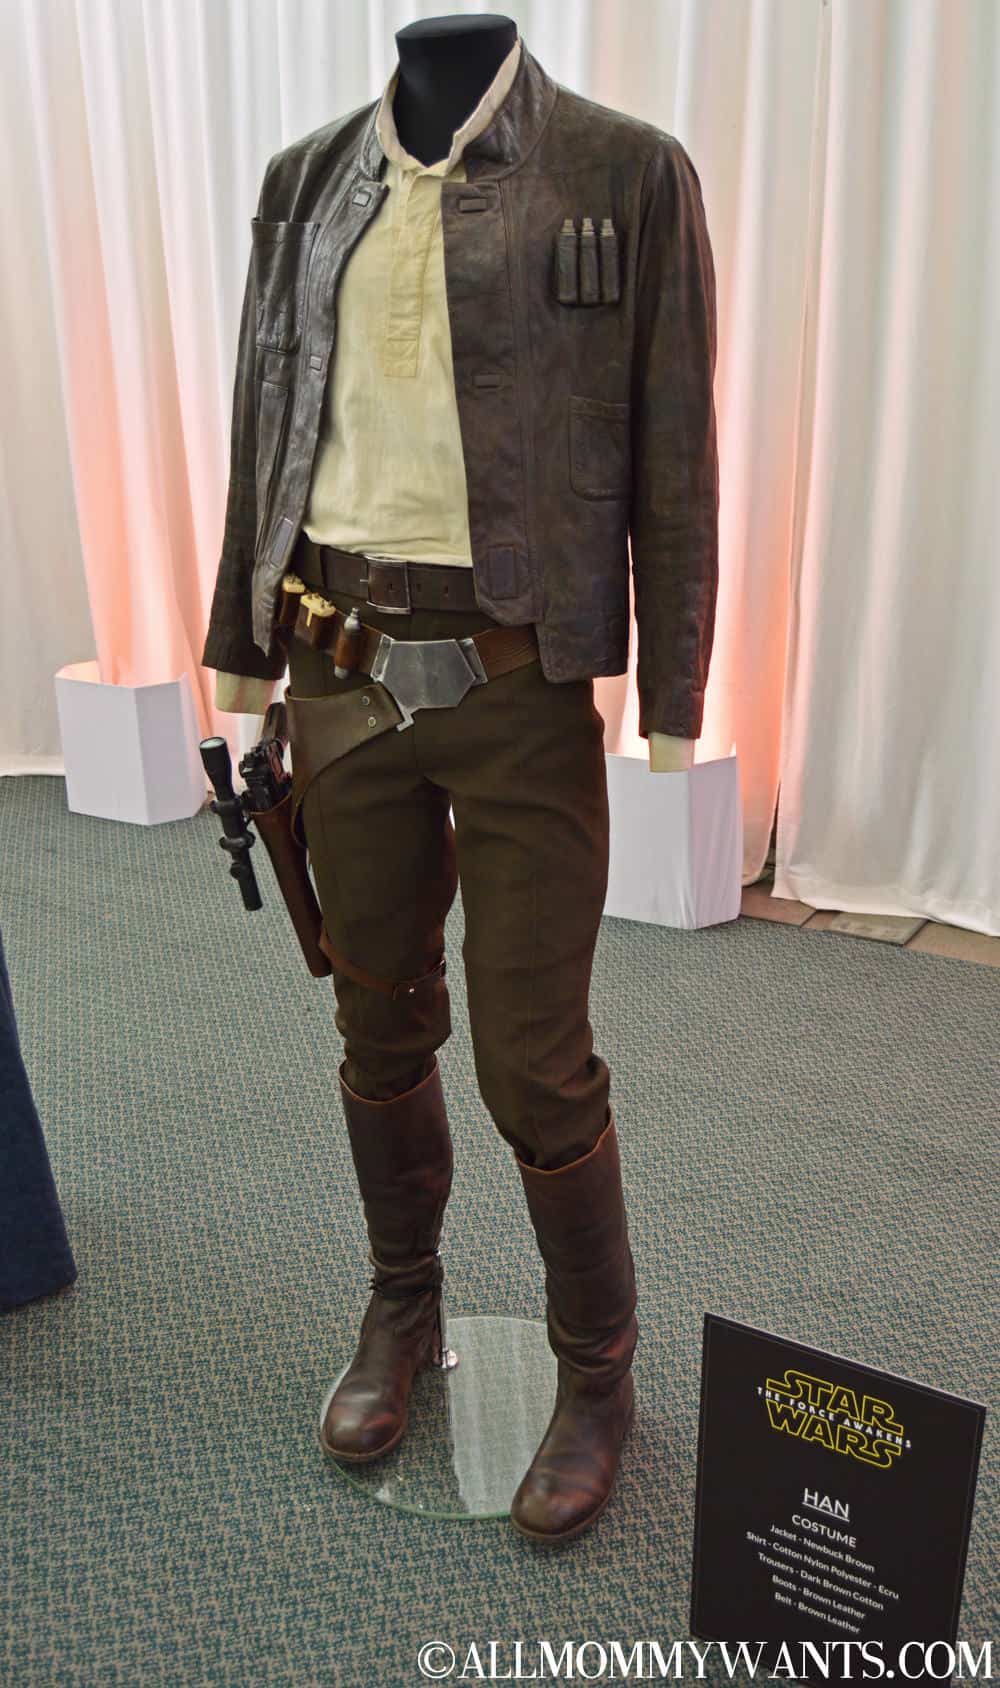 Star Wars: The Force Awakens Global Press Event In Photos